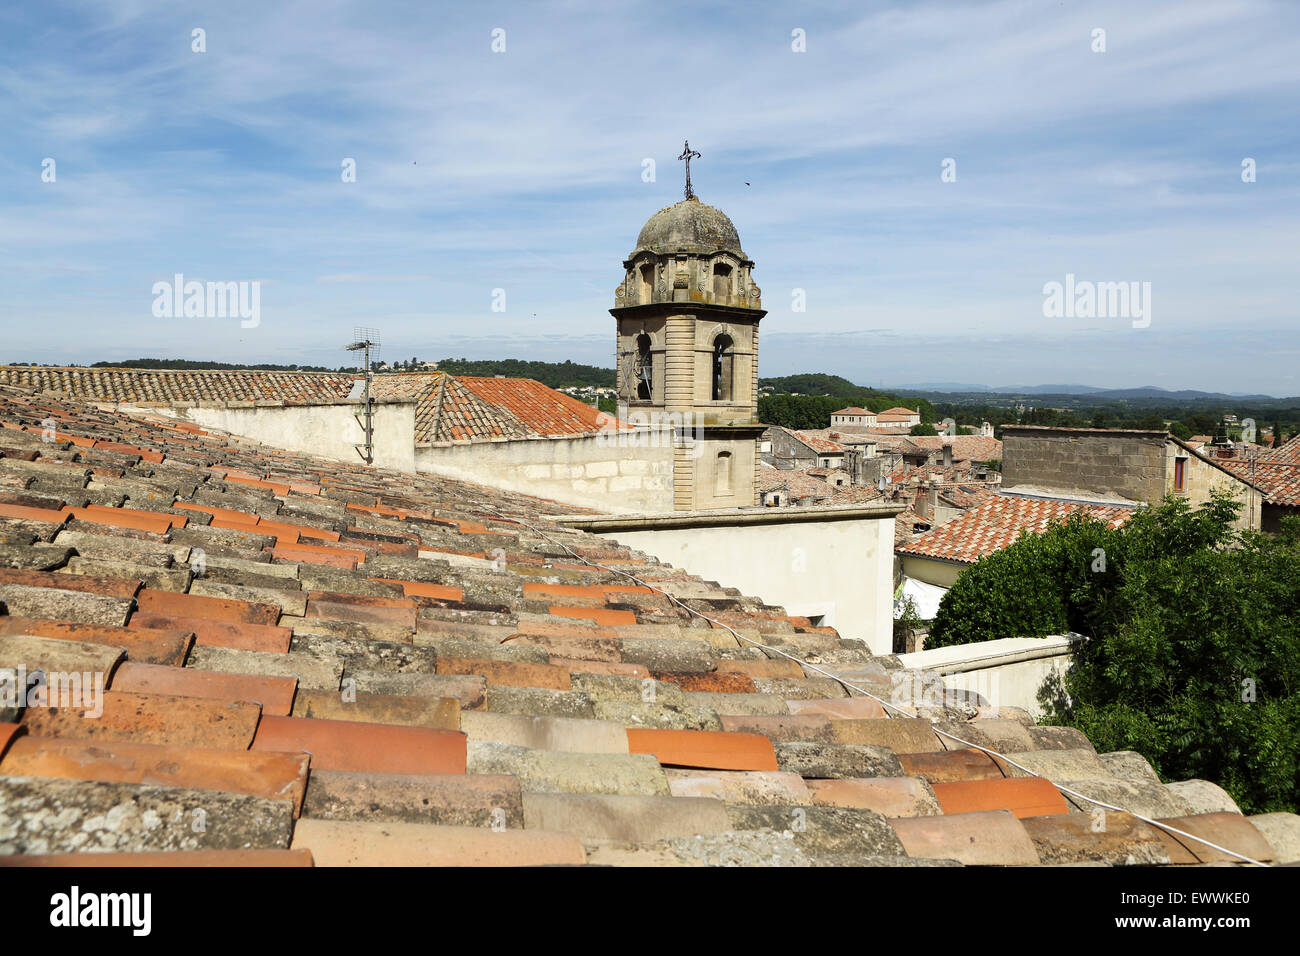 Terracotta roof tiles in Sommieres, France. The tower of the church of Saint Pons stands in the background. Stock Photo